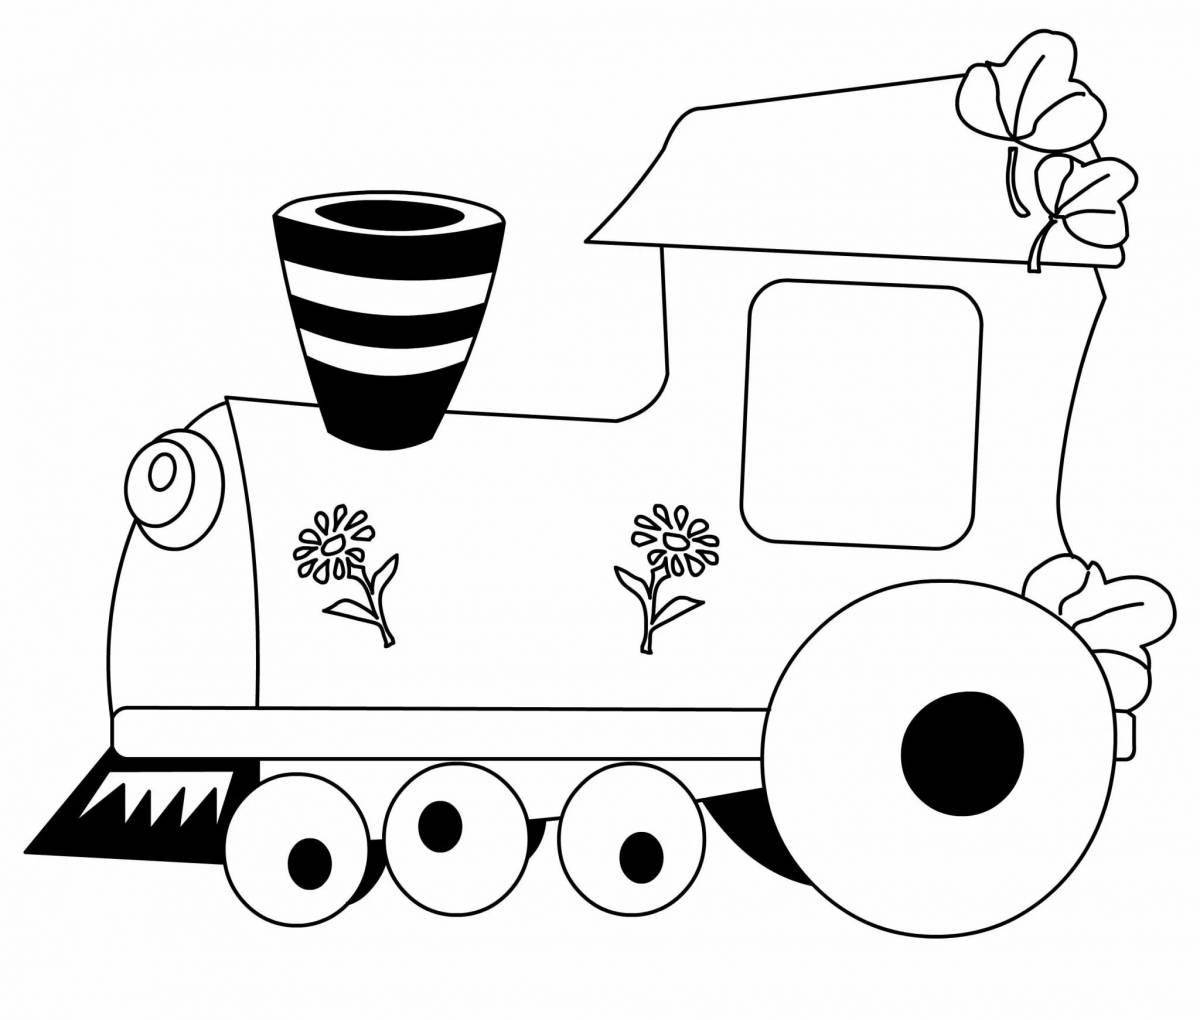 Exciting train with wagon coloring book